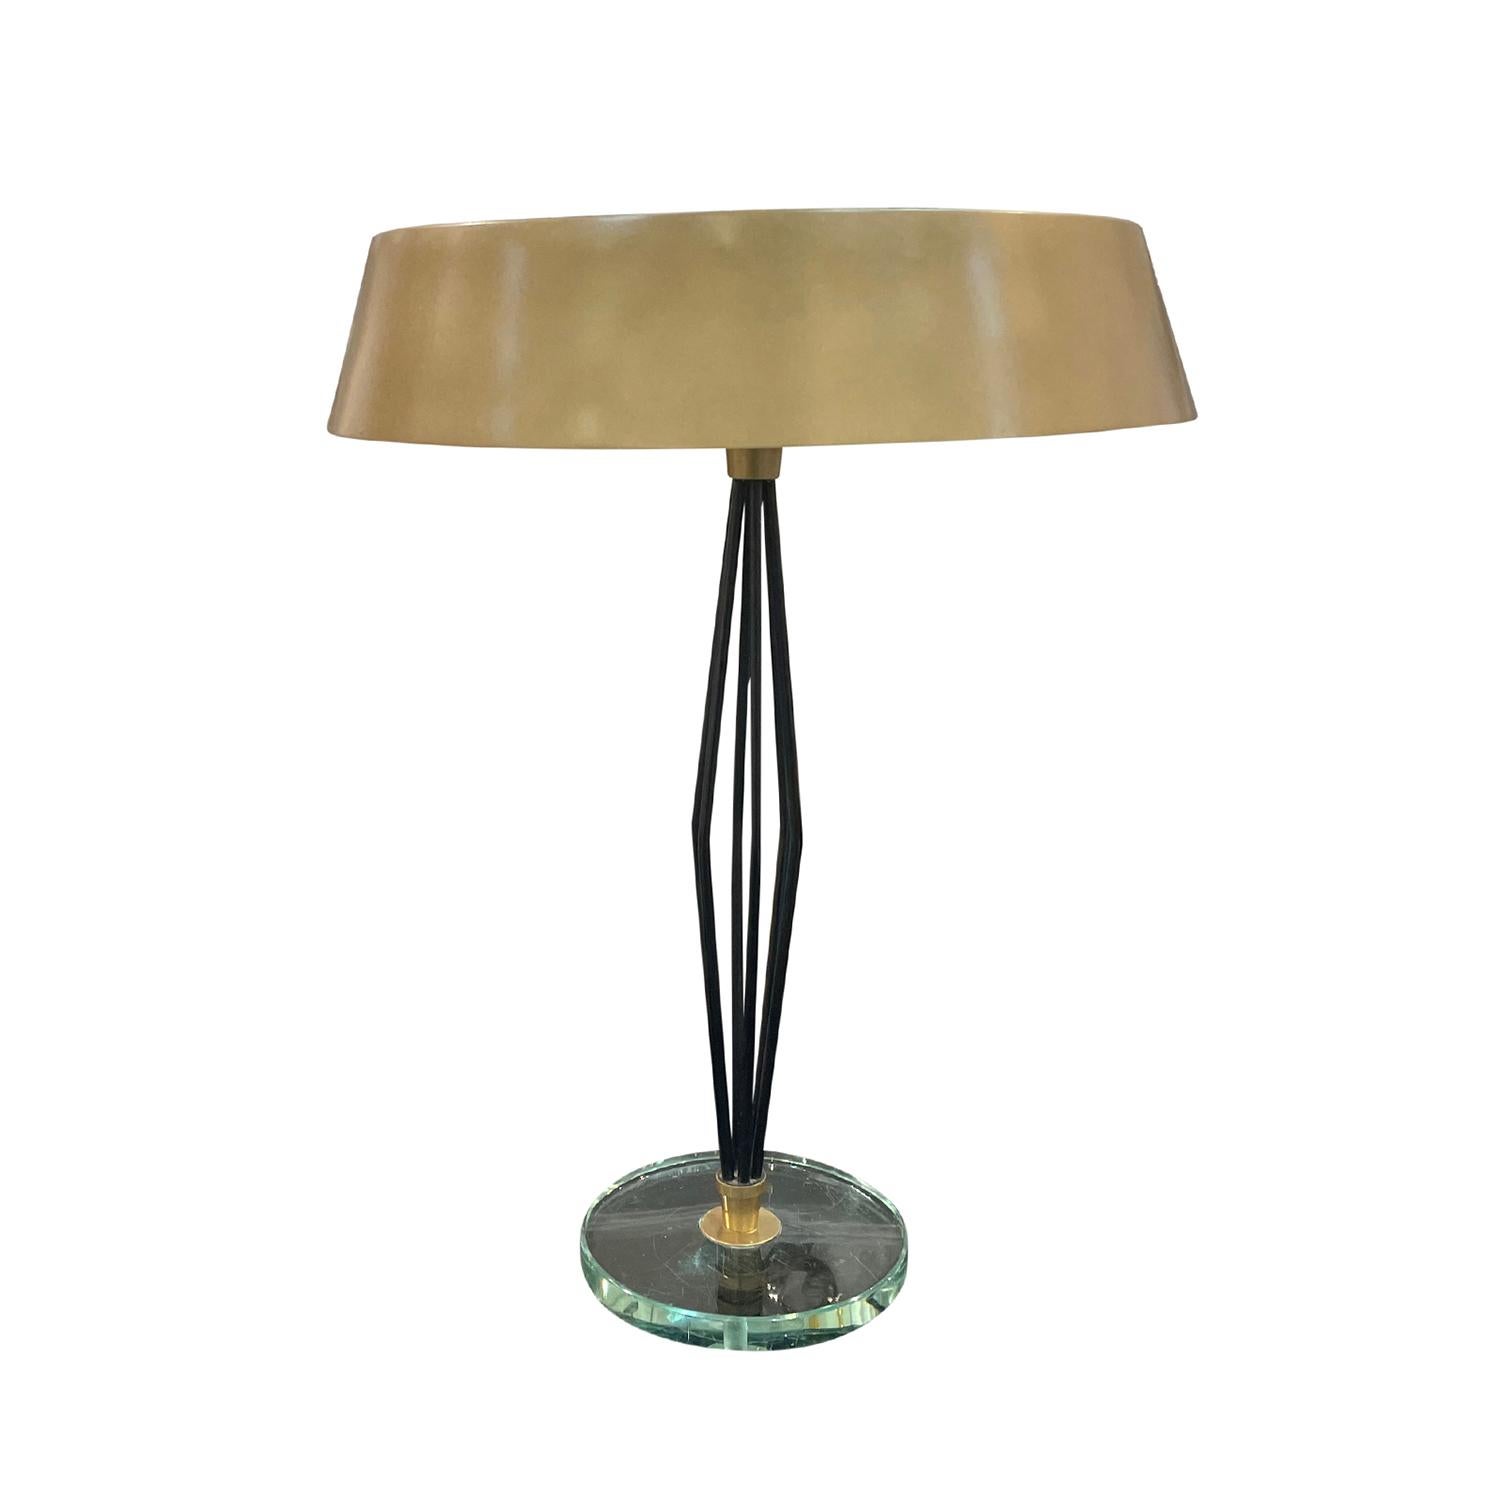 A vintage Mid-Century modern French, Italian table lamp made of hand crafted lacquered metal designed by Max Ingrand and produced by Fontana Arte, in good condition. The sculptural desk light with a three light socket has a round painted bronze